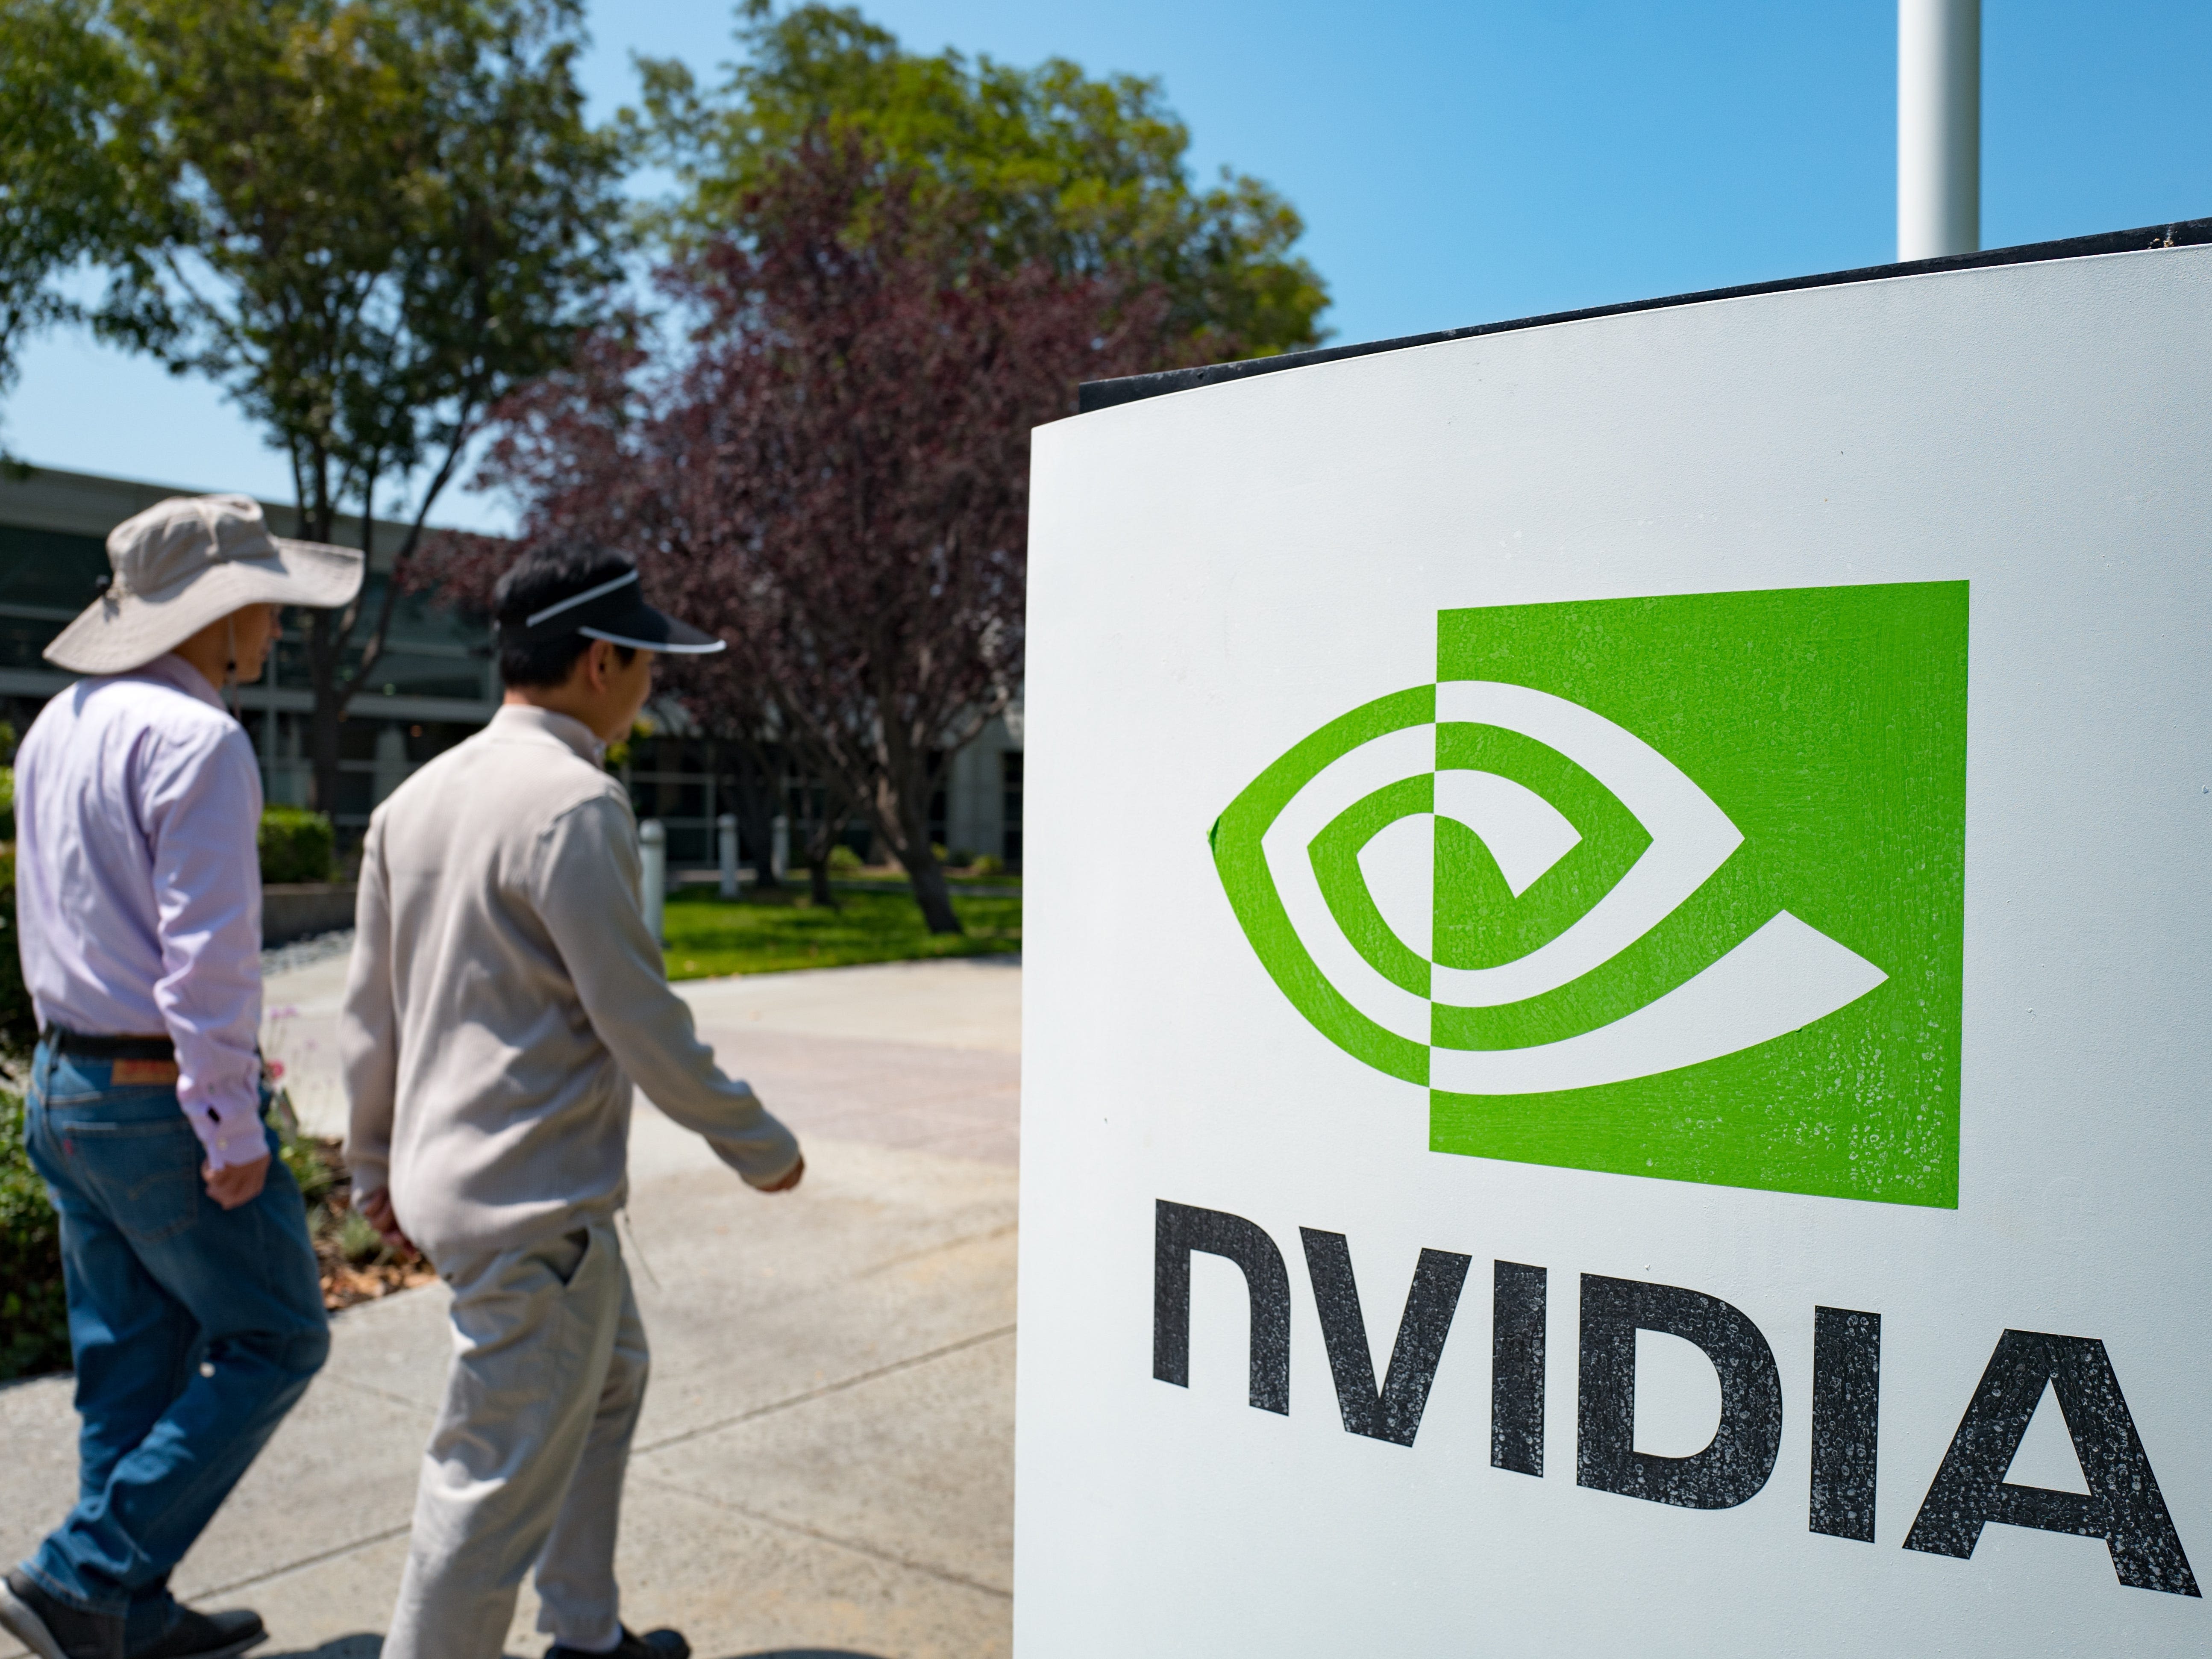 Stock market today: Indexes pop after Nvidia's blowout earnings report